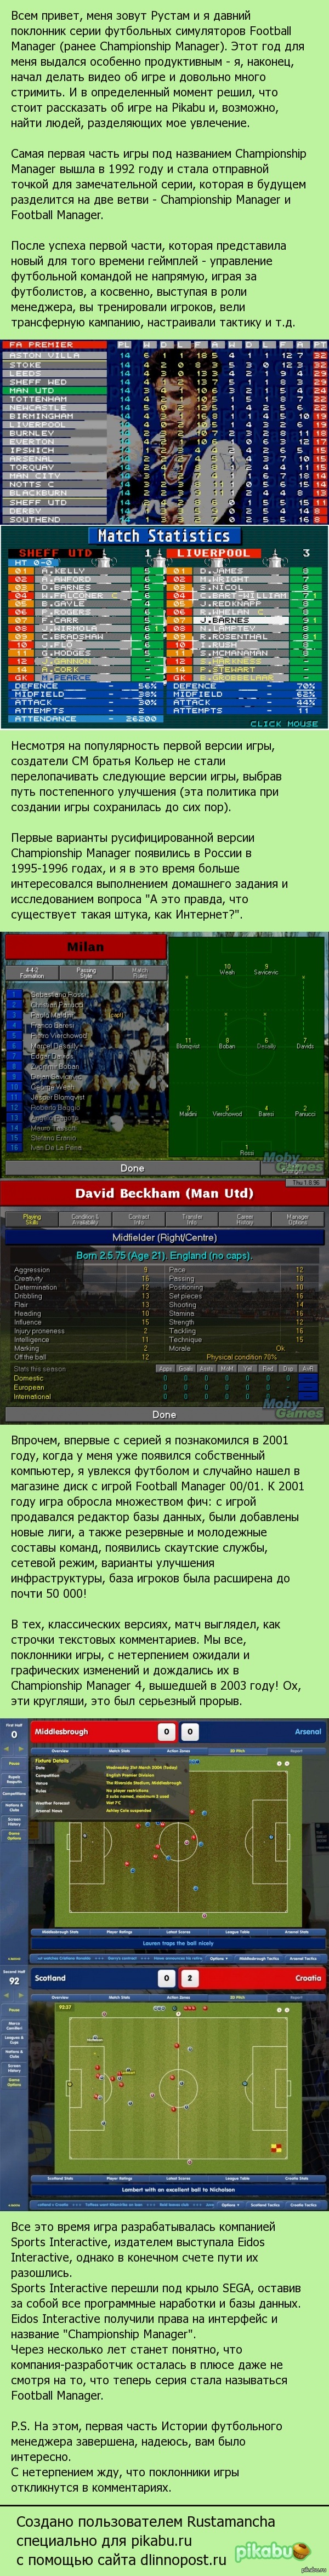    ,        Championship Manager (Football Manager)